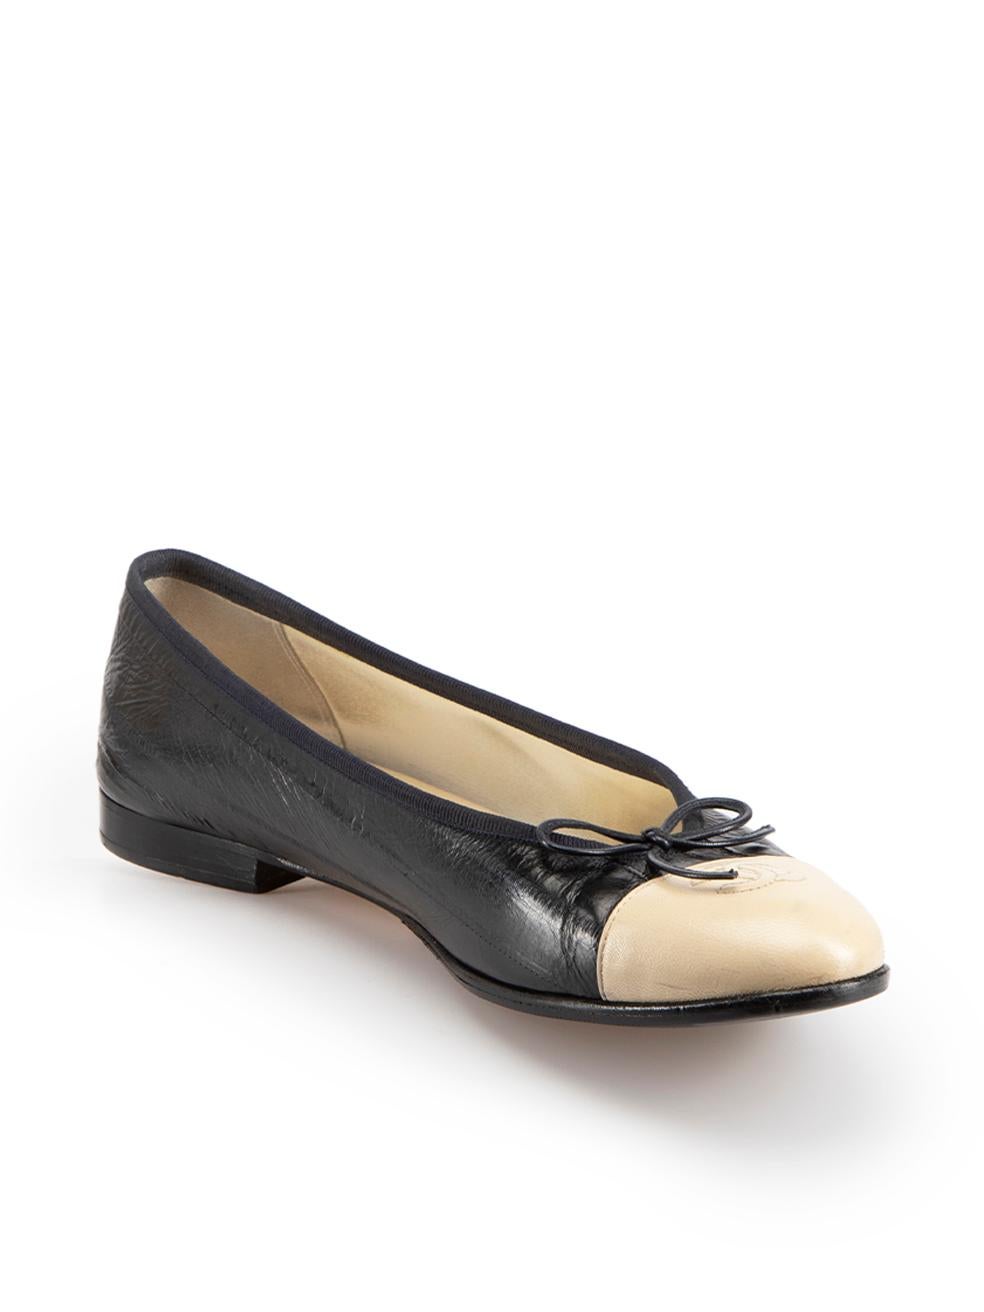 CONDITION is Very good. Minimal wear to shoes is evident. Minimal wear to the toes with scuff marks on this used Chanel designer resale item. These shoes come with original dust bag.



Details


Black

Eel leather

Ballet flats

Cream leather toe